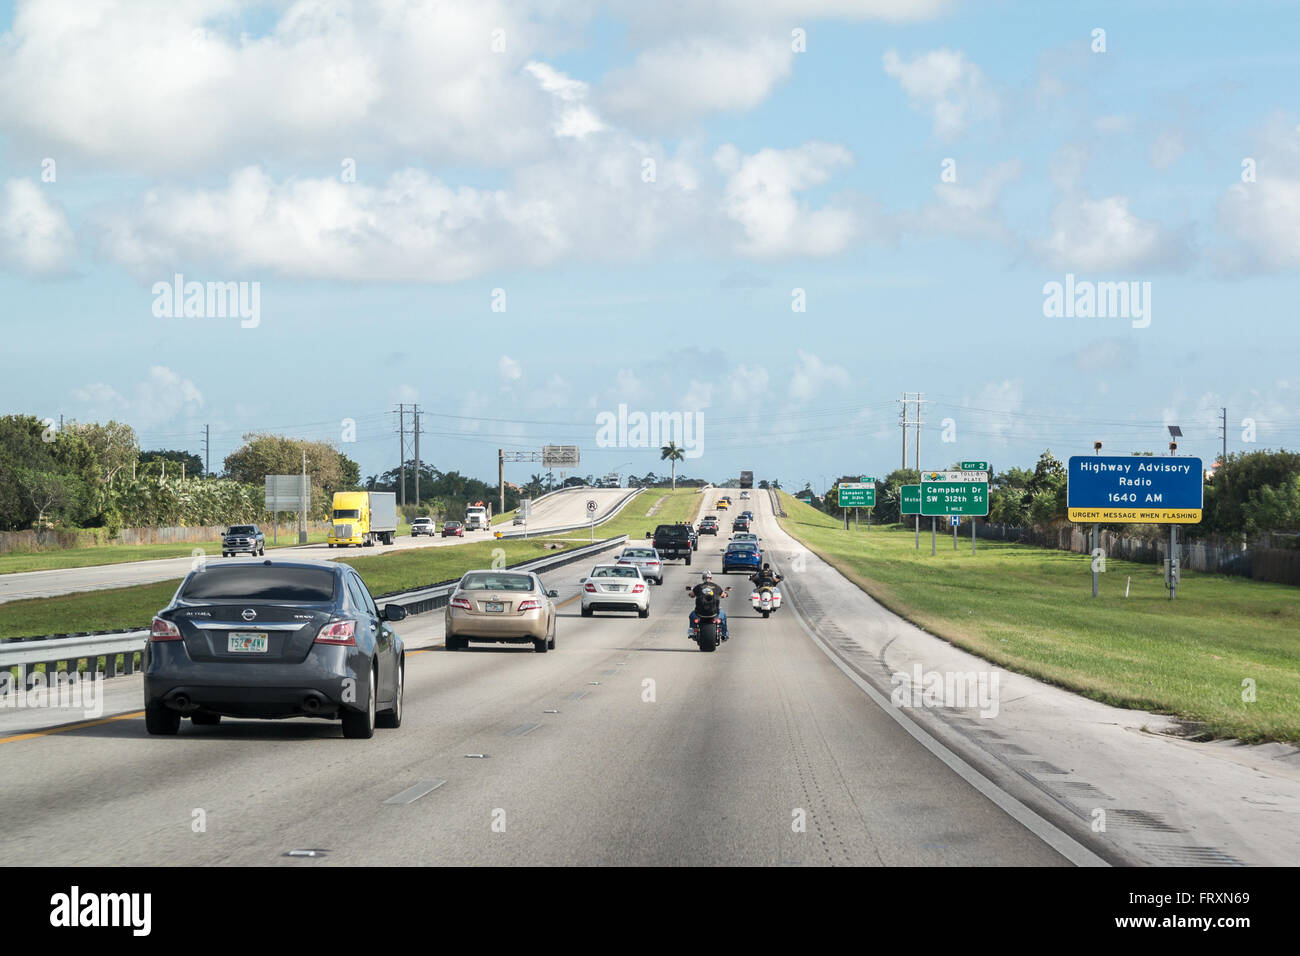 Traffic with cars and motorbikes on highway in South Florida, USA Stock Photo